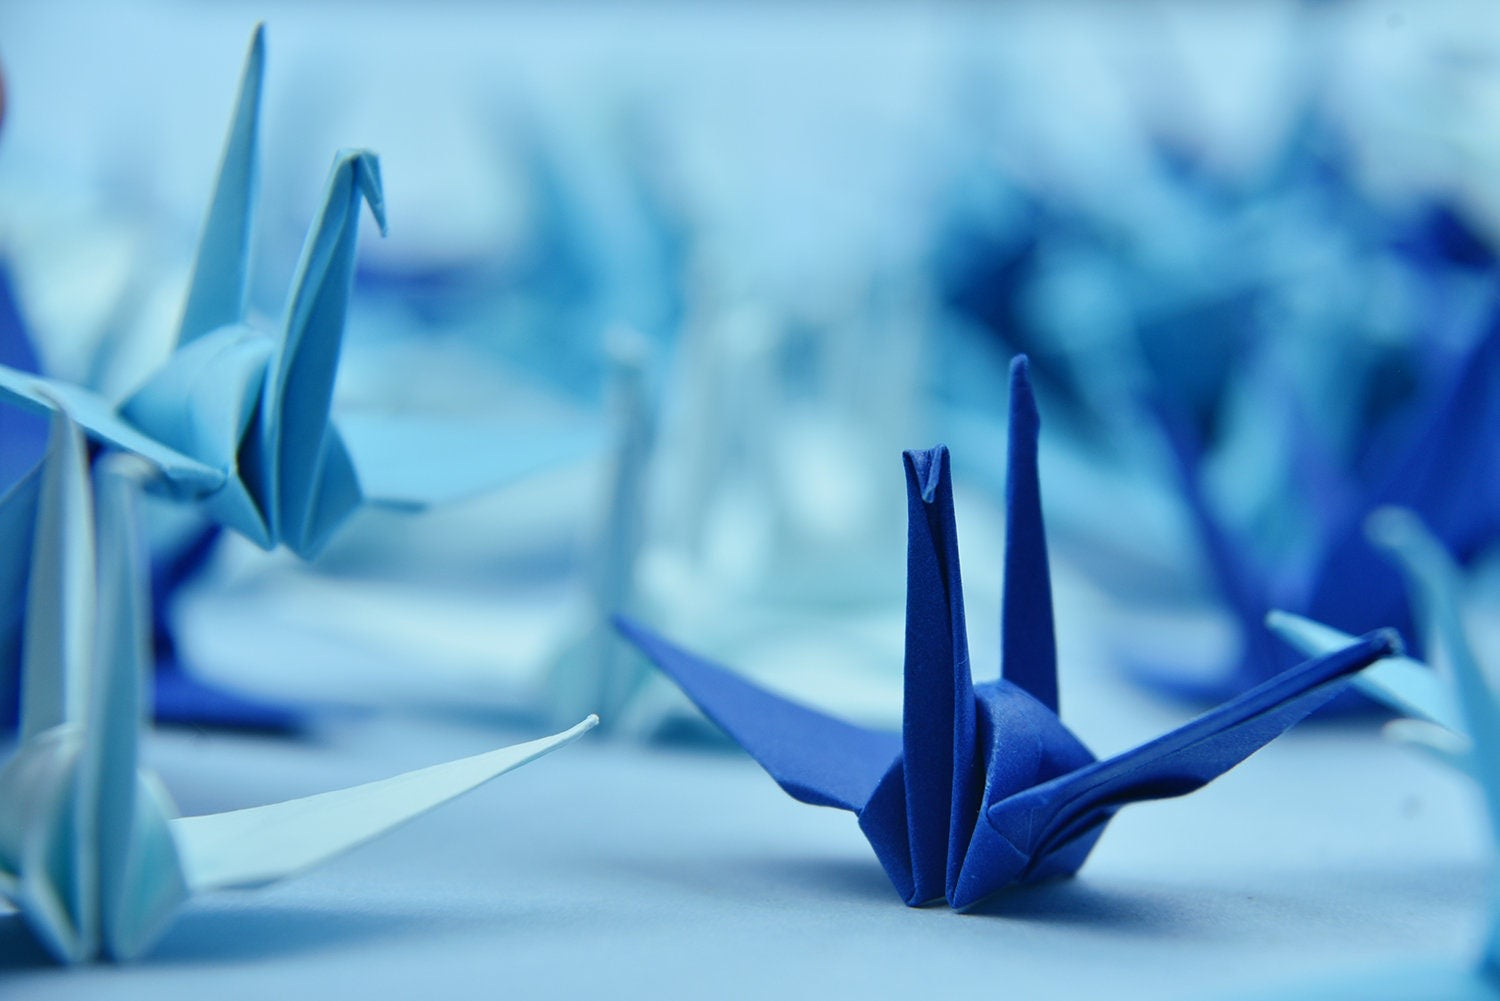 100 Navy Blue Origami Cranes 3 inch OrigamiPolly - Pre-Made for Wedding, Anniversary, Valentine's Backdrop